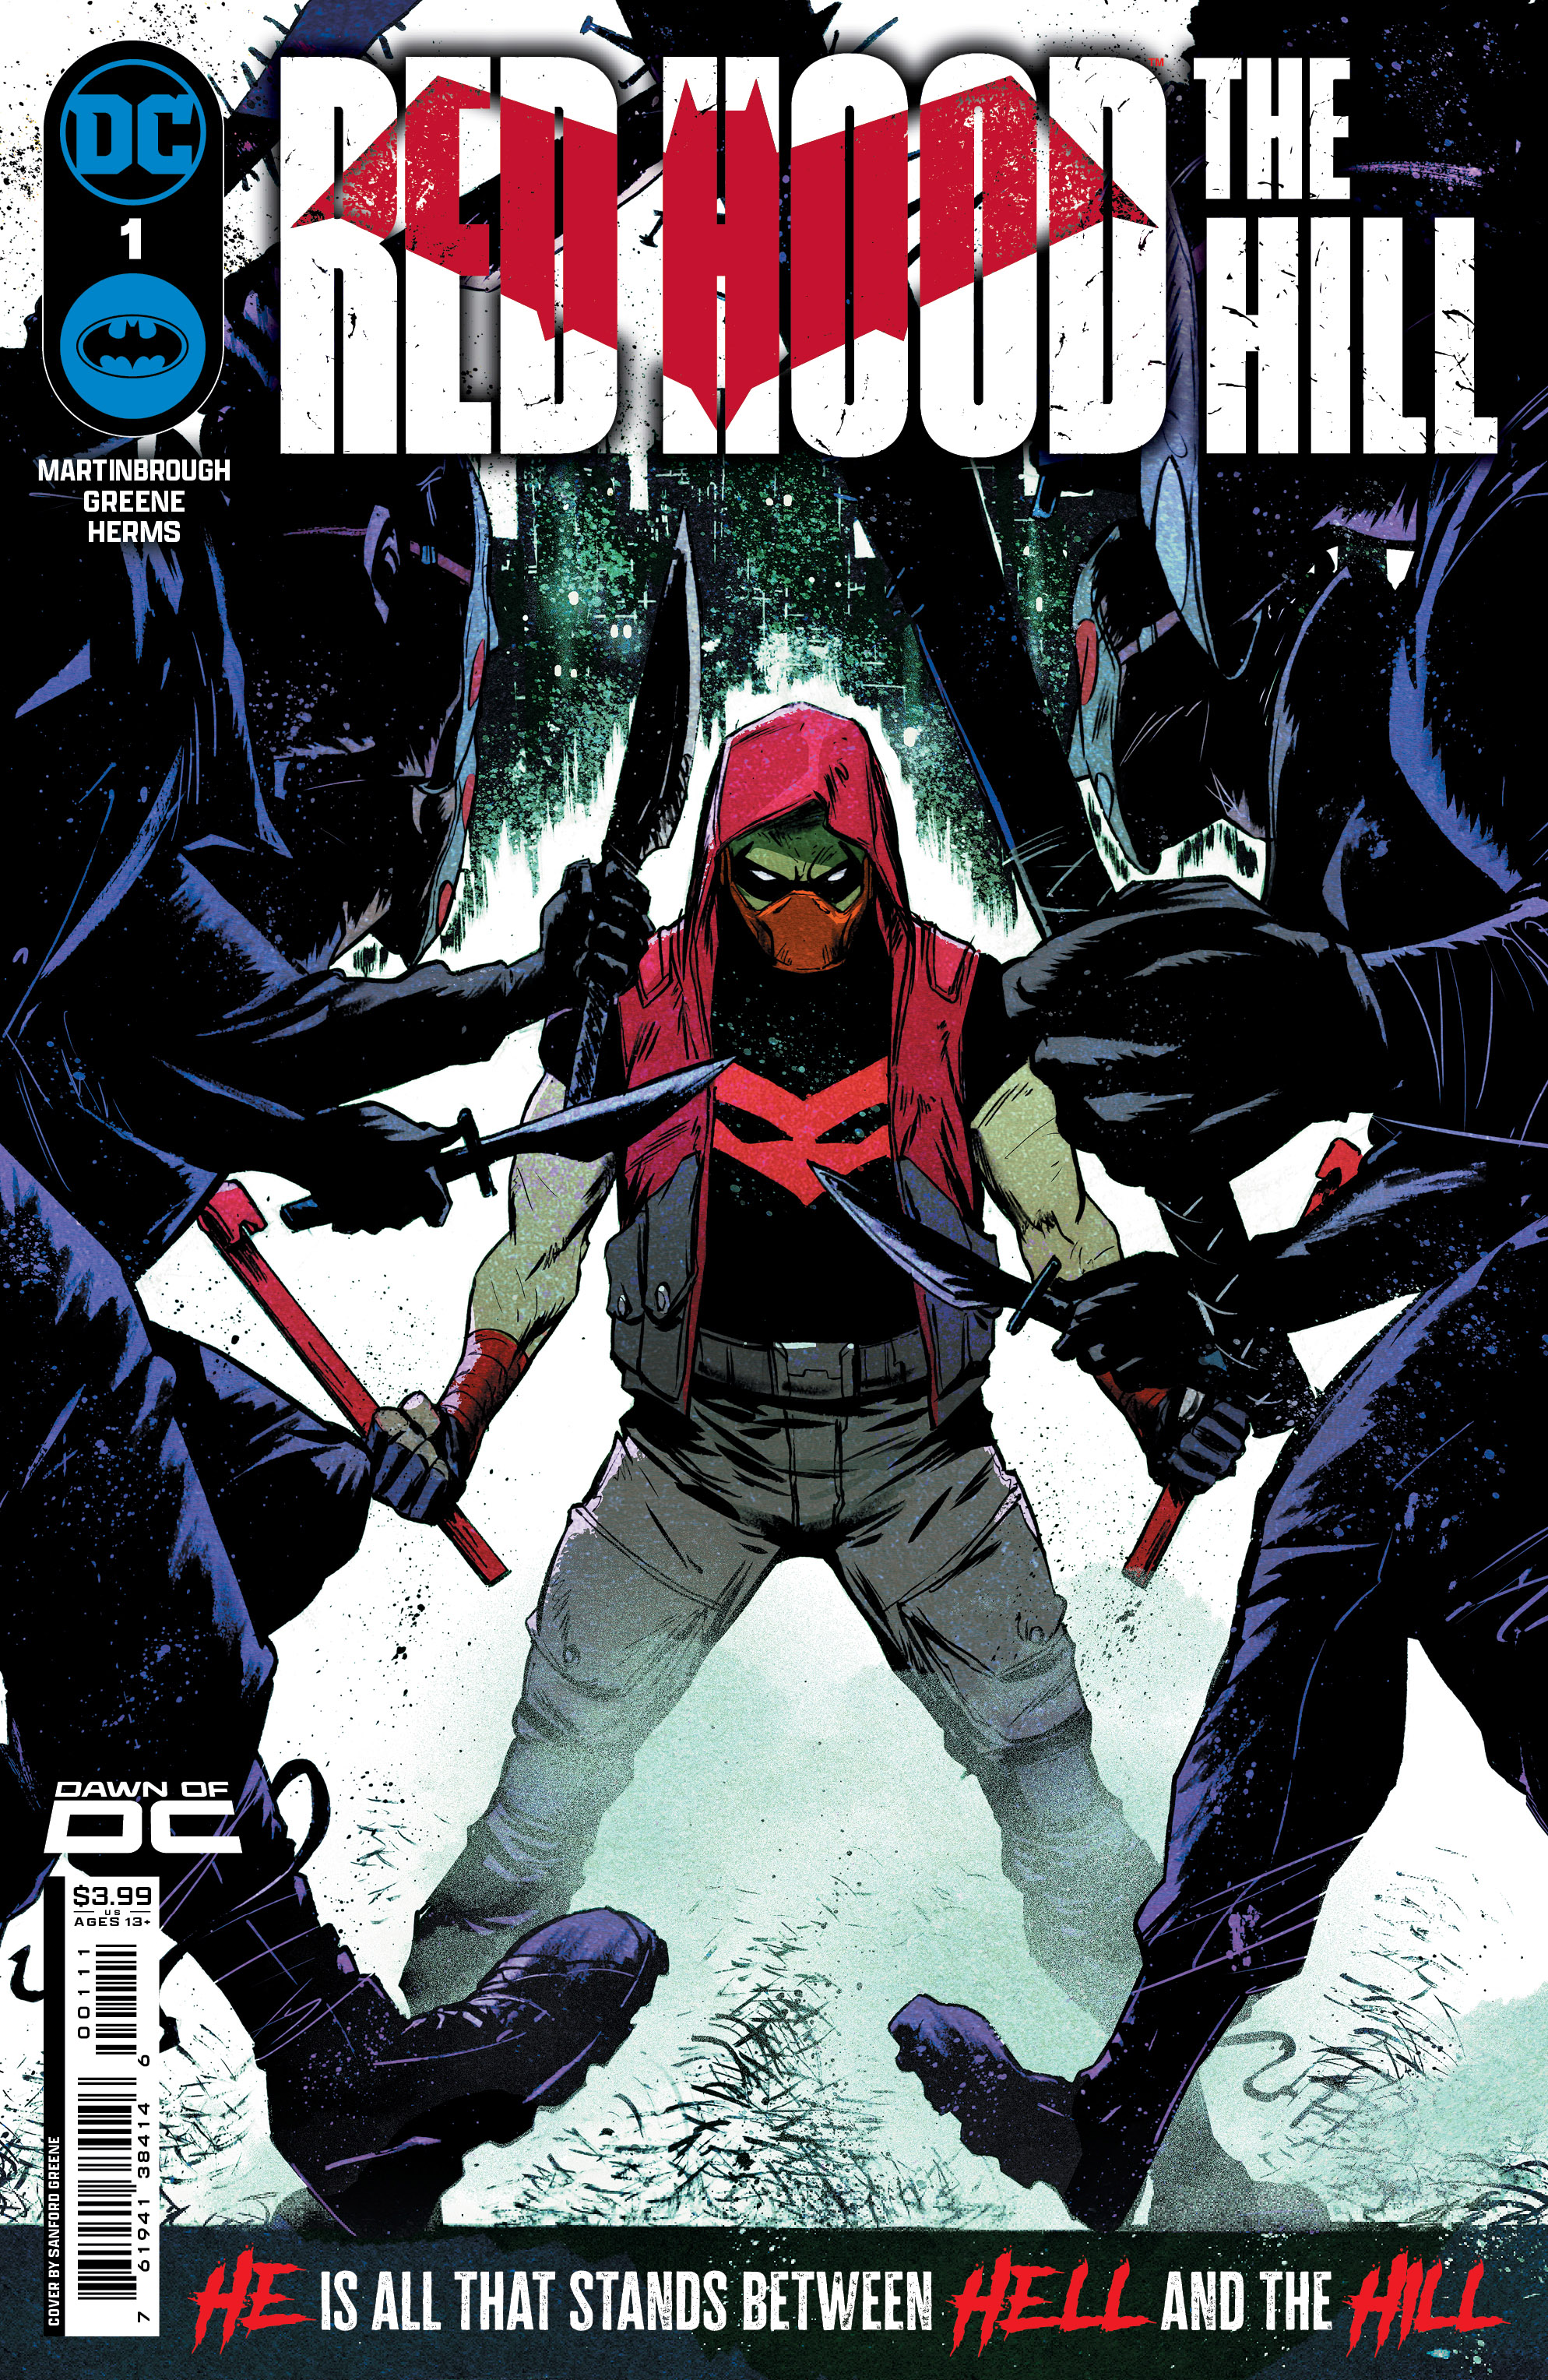 Red Hood the Hill #1 Cover A Sanford Greene (Of 6)